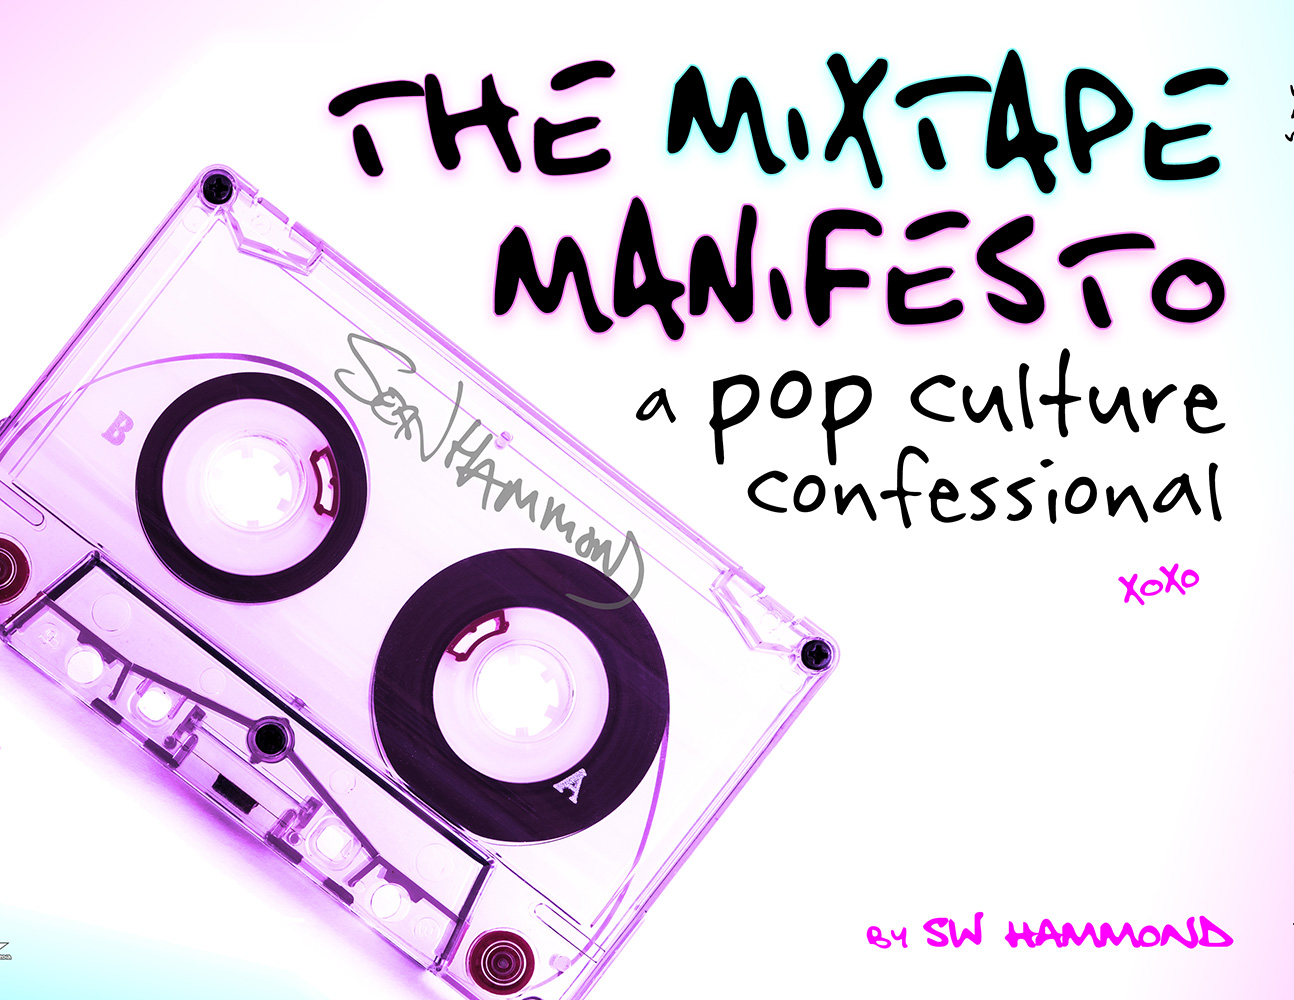 The Mixed Tape Manifesto: A Pop Culture Confessional